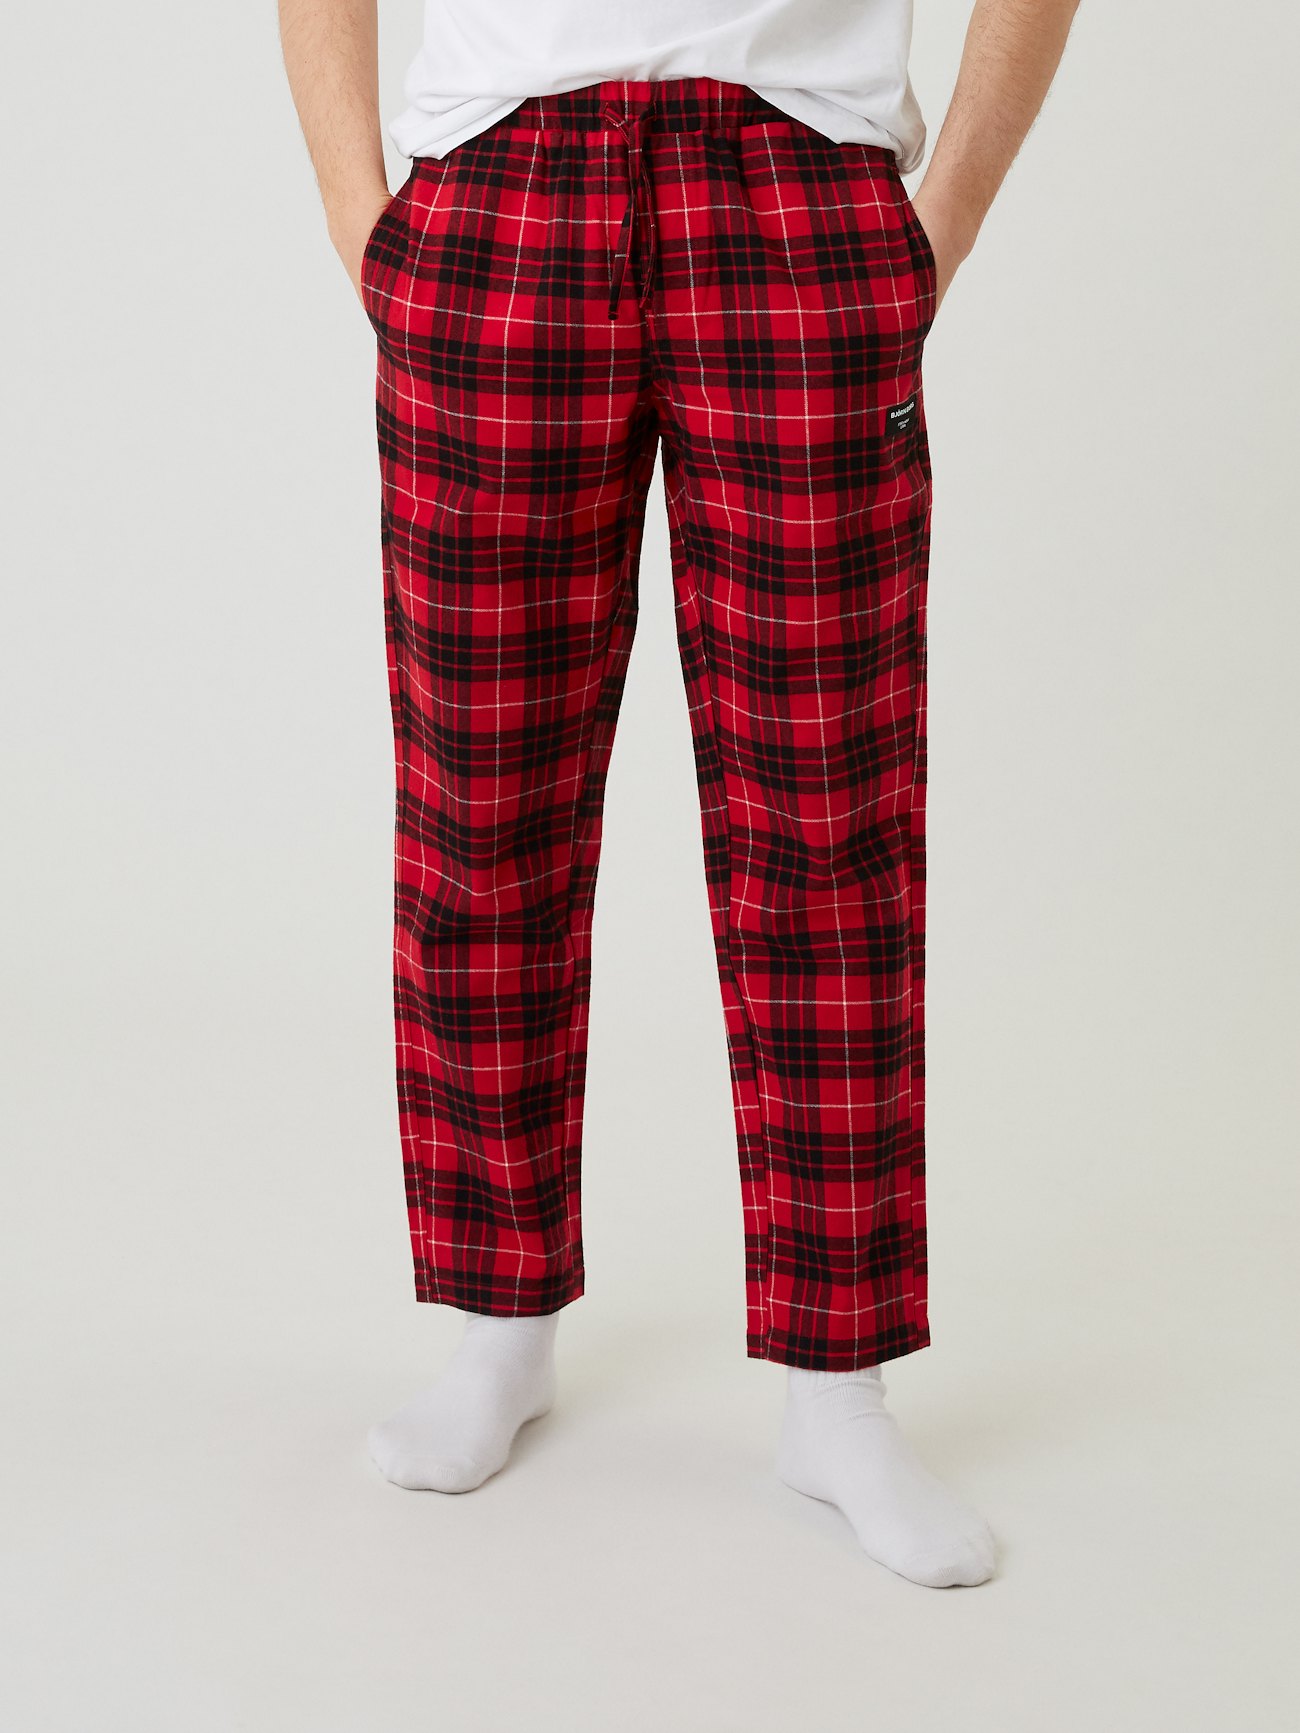 Women's Side Seamless Flannel Stand Collar Pajamas